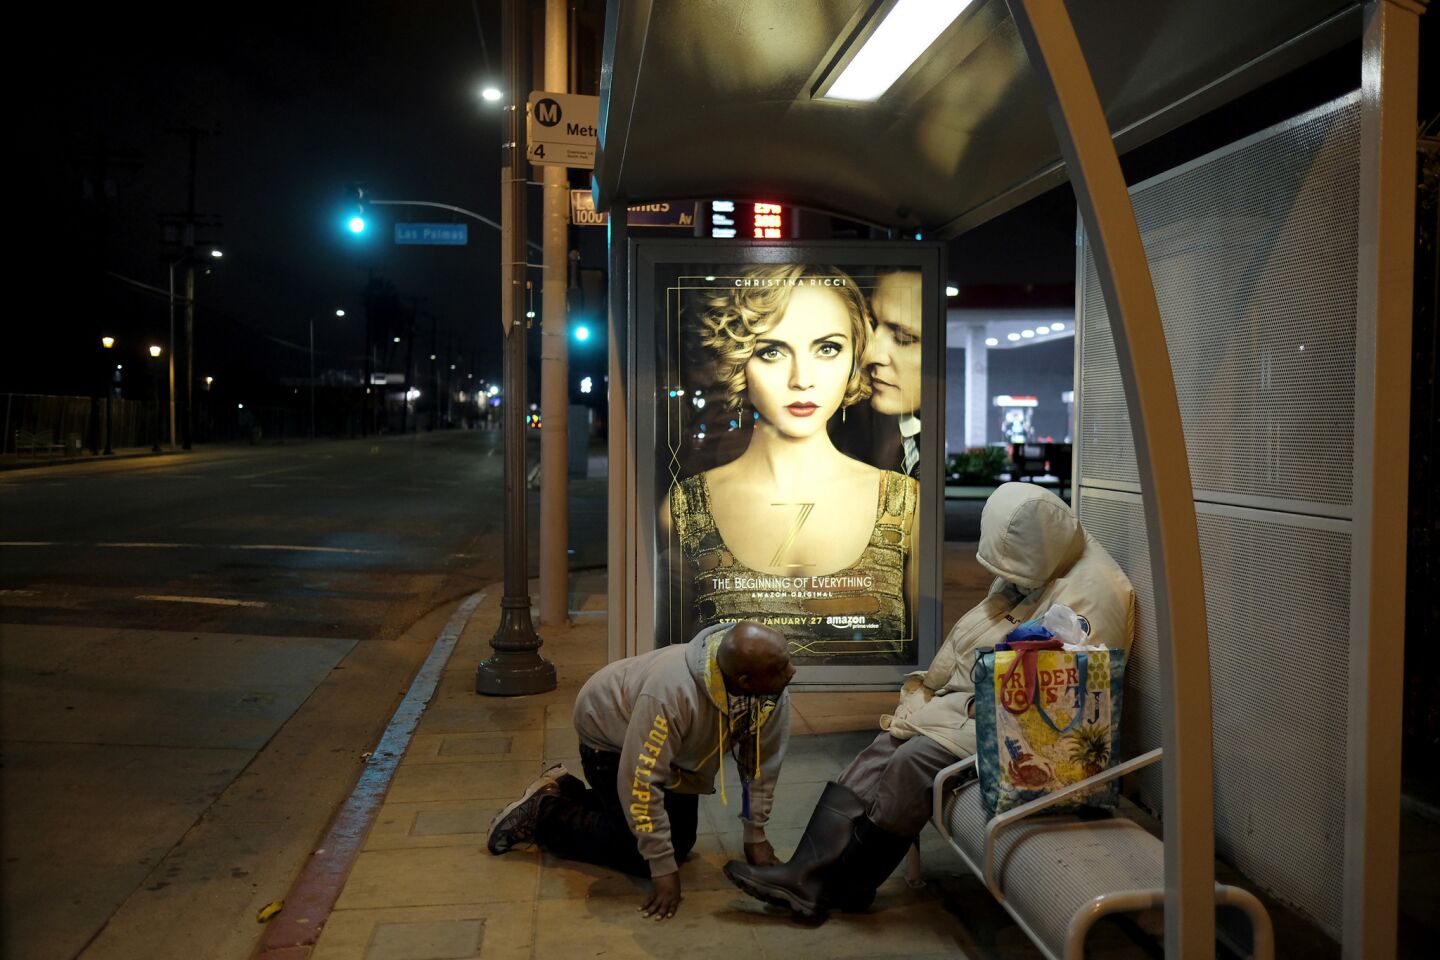 Housing Works caseworker Anthony Ruffin kneels as he checks on a homeless woman sleeping on a bus bench in Hollywood.